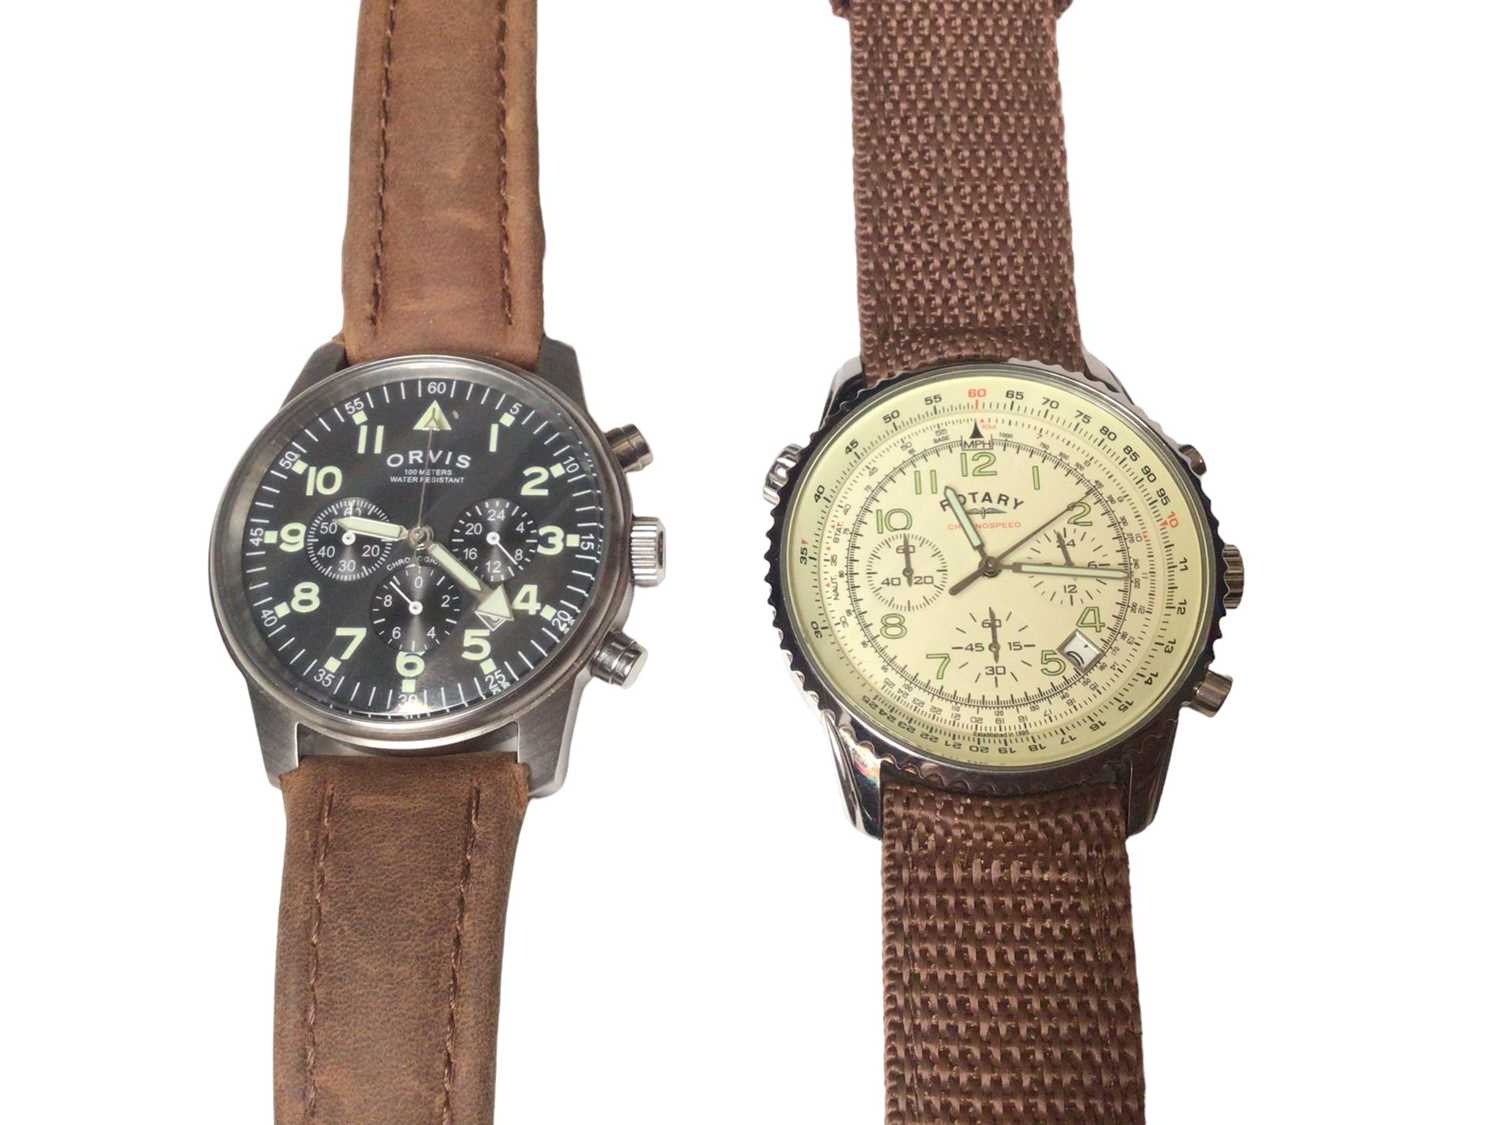 Orvis Chronograph military style wristwatch and a Rotary Chronospeed wristwatch (2)